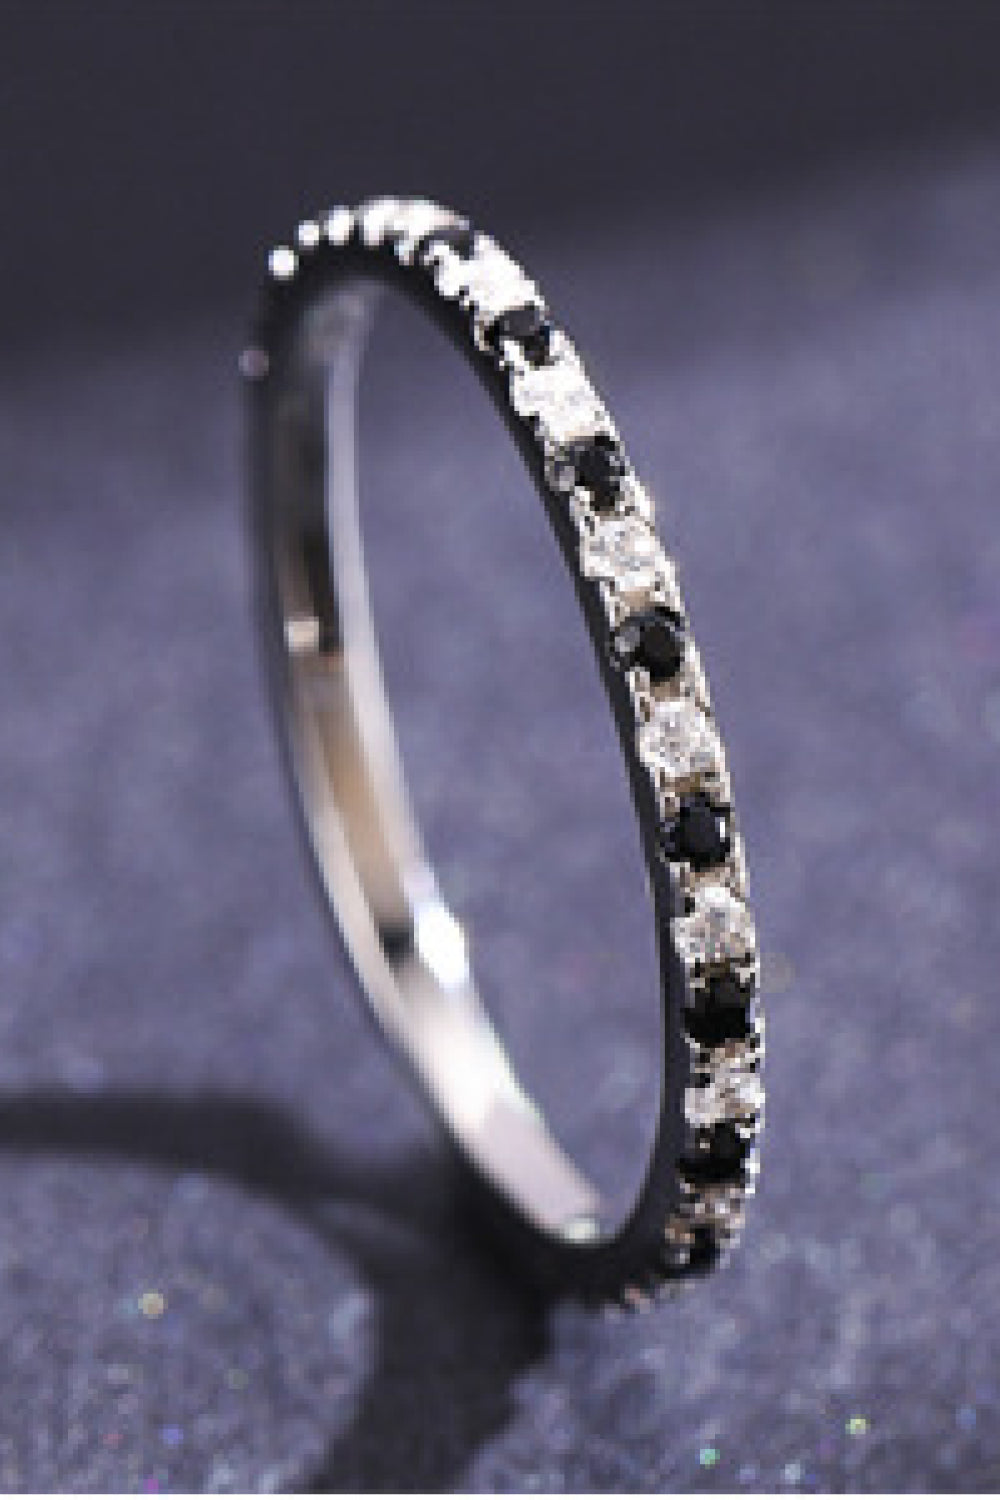 Sterling Silver CZ Stackable Ring